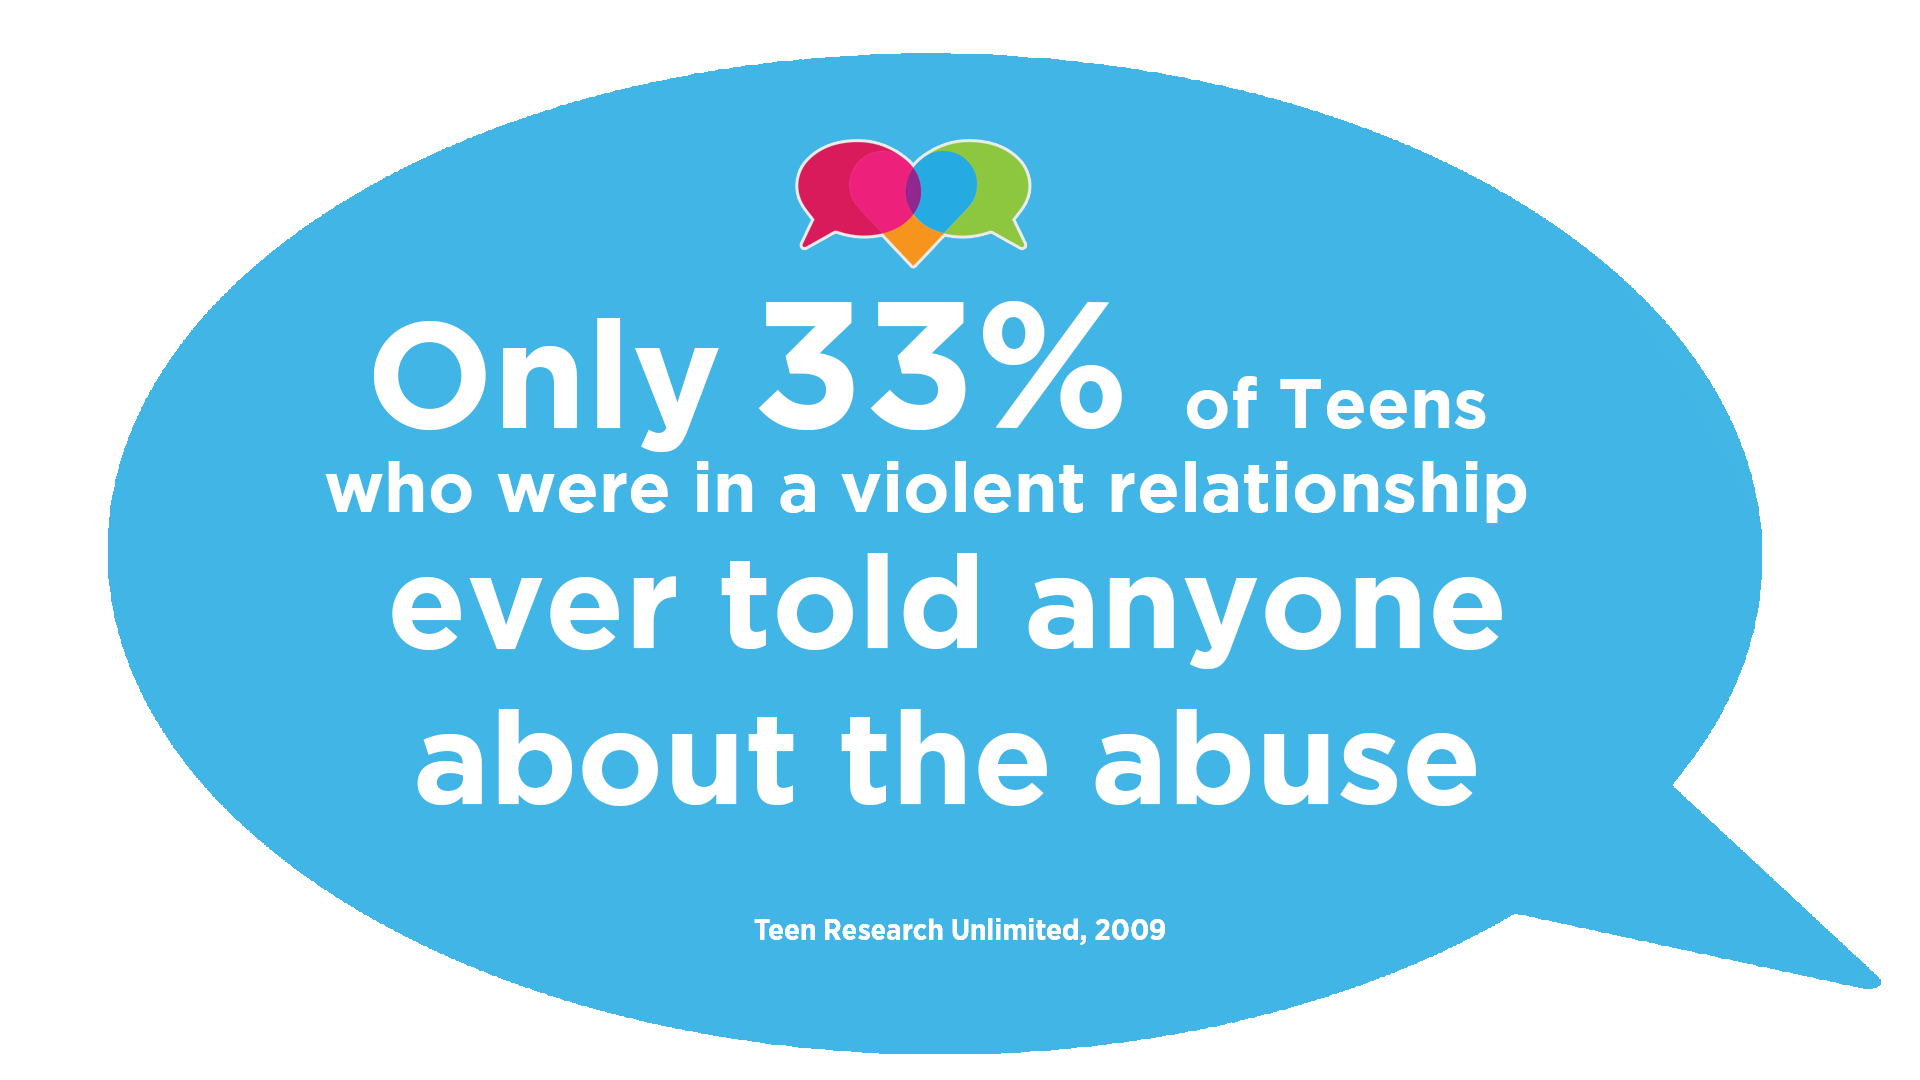 Only 33% of teens who were in a violent relationship ever told anyone about the abuse